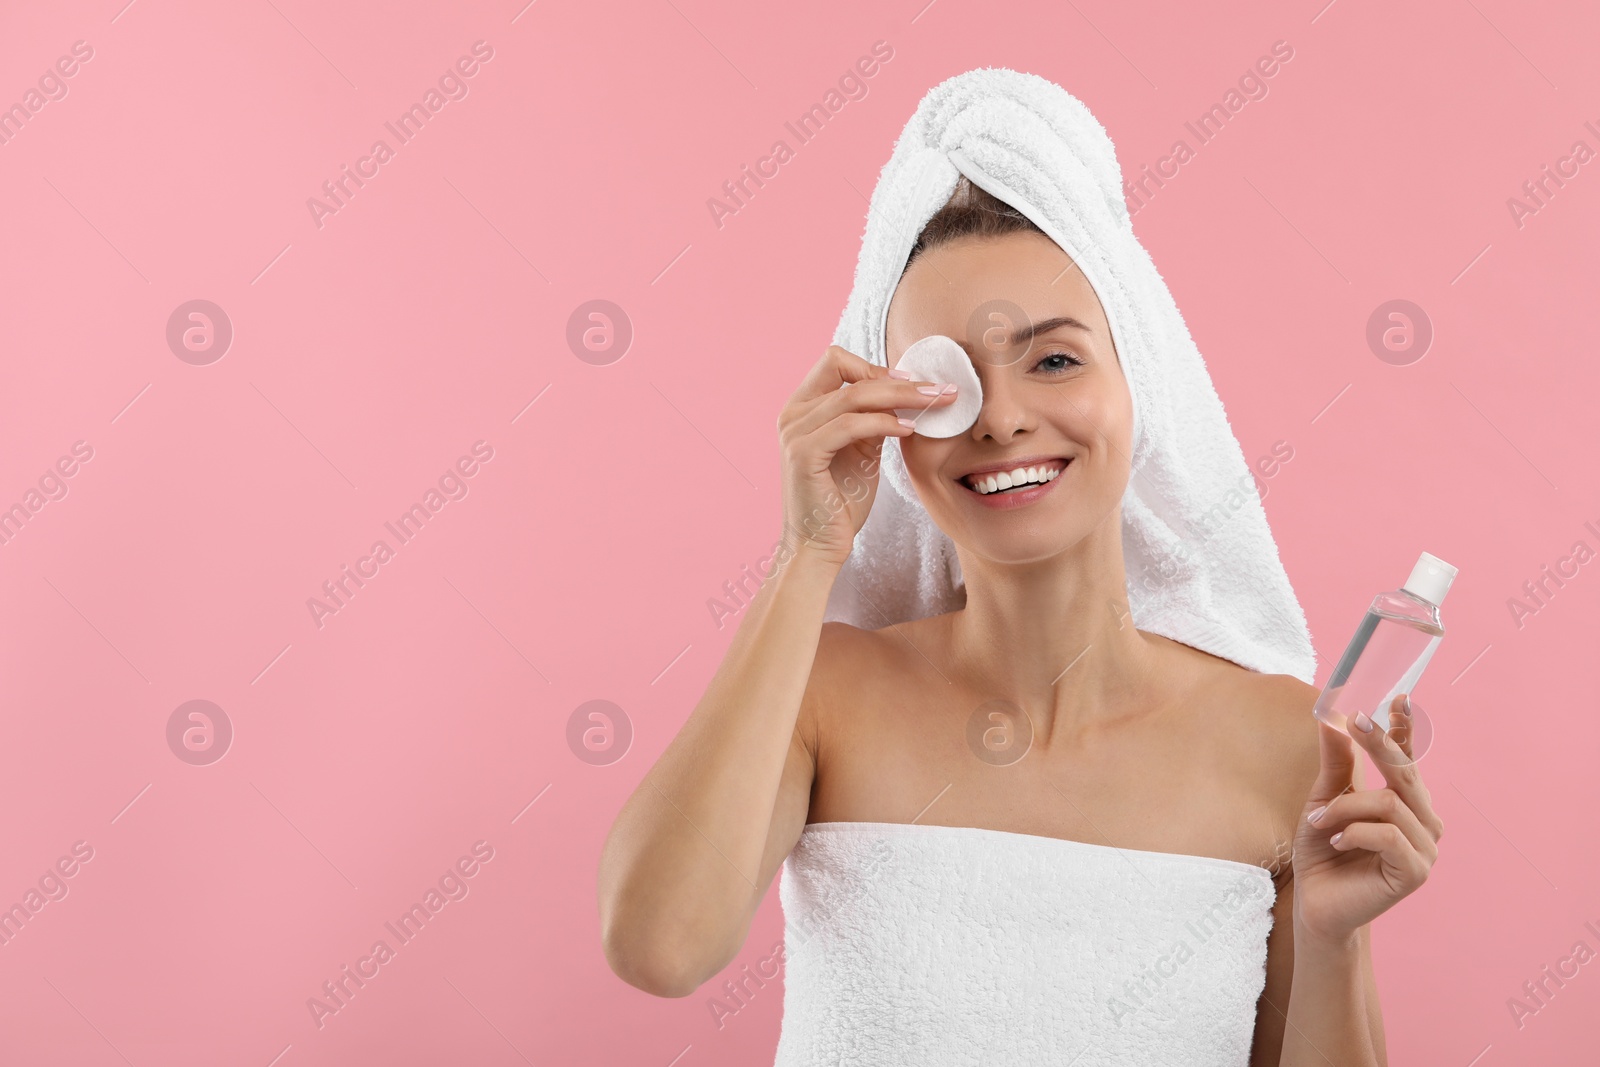 Photo of Smiling woman removing makeup with cotton pad and holding bottle on pink background. Space for text